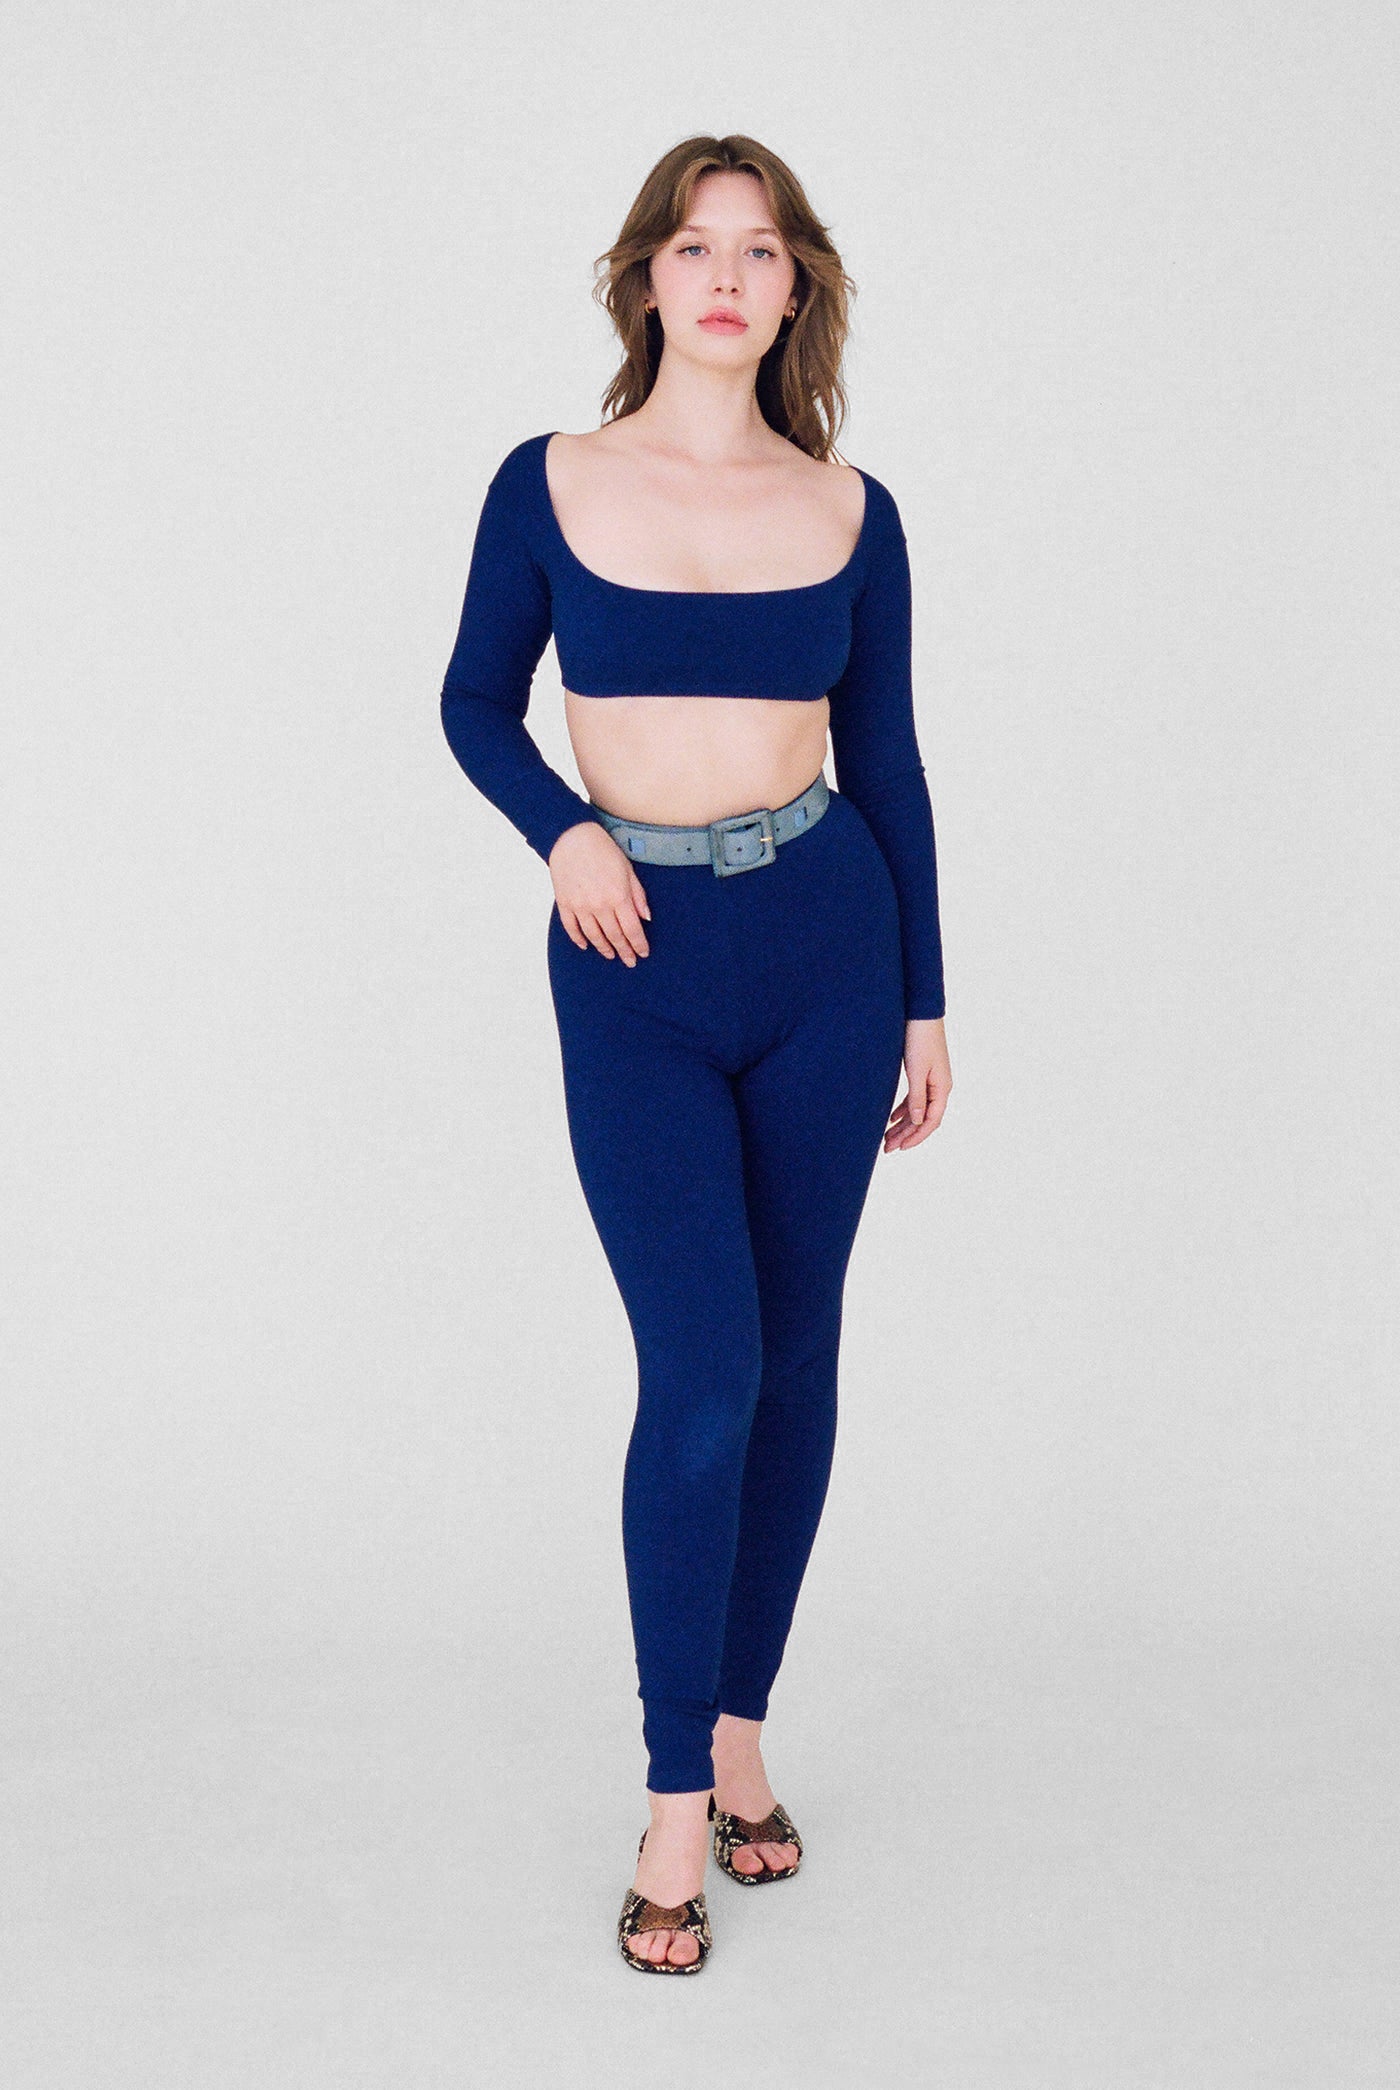 El Tigre Chiquito Long Sleeve Crop Top in Lapis by Gil Rodriguez